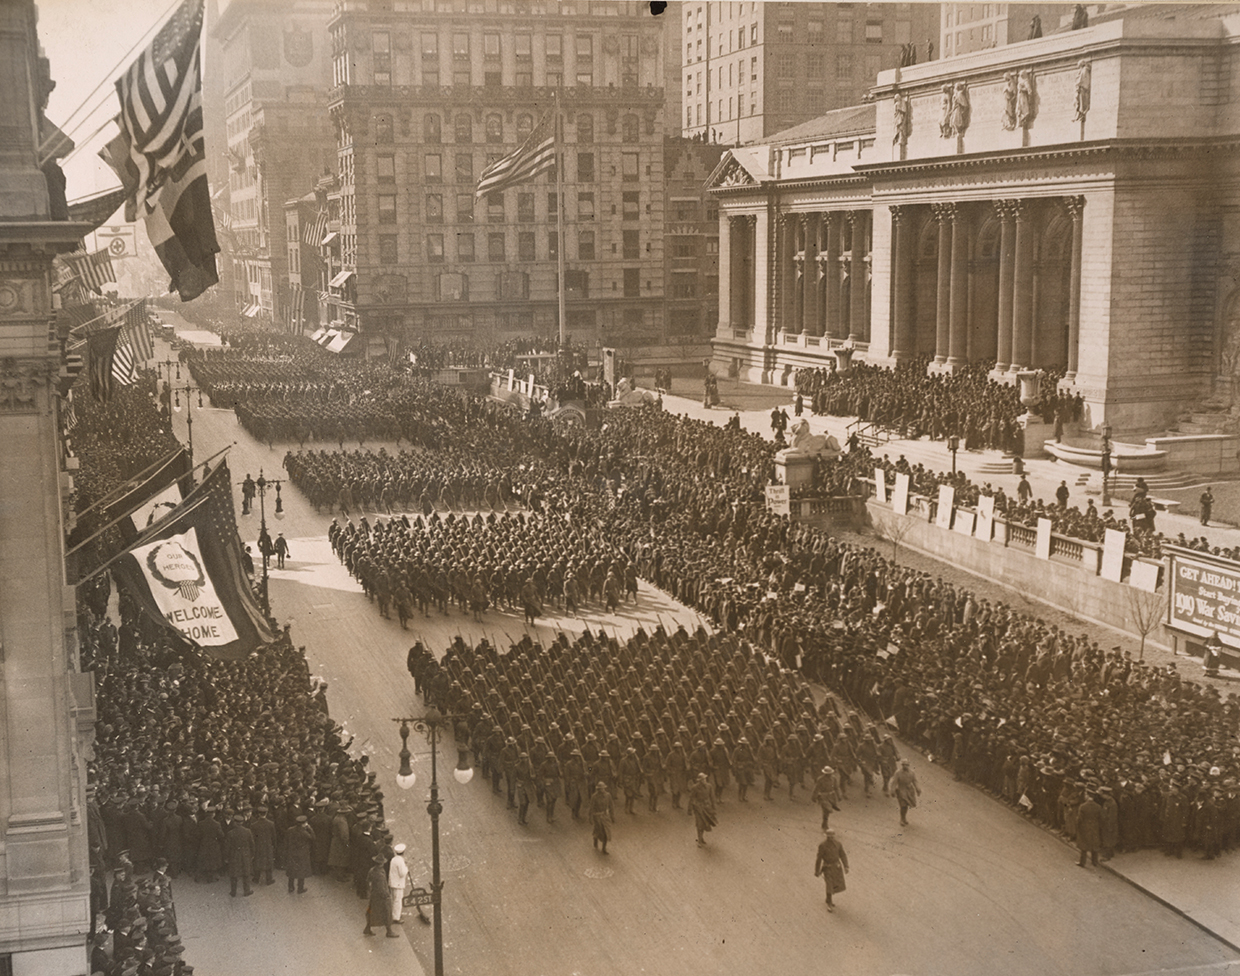 The all-Black 369th Division, or Harlem Hellfighters, return home to New York City for a victory parade after fighting valiantly in World War I, Feb. 18, 1919. Photo via National Archives, originally captured by Western Newspapers Union